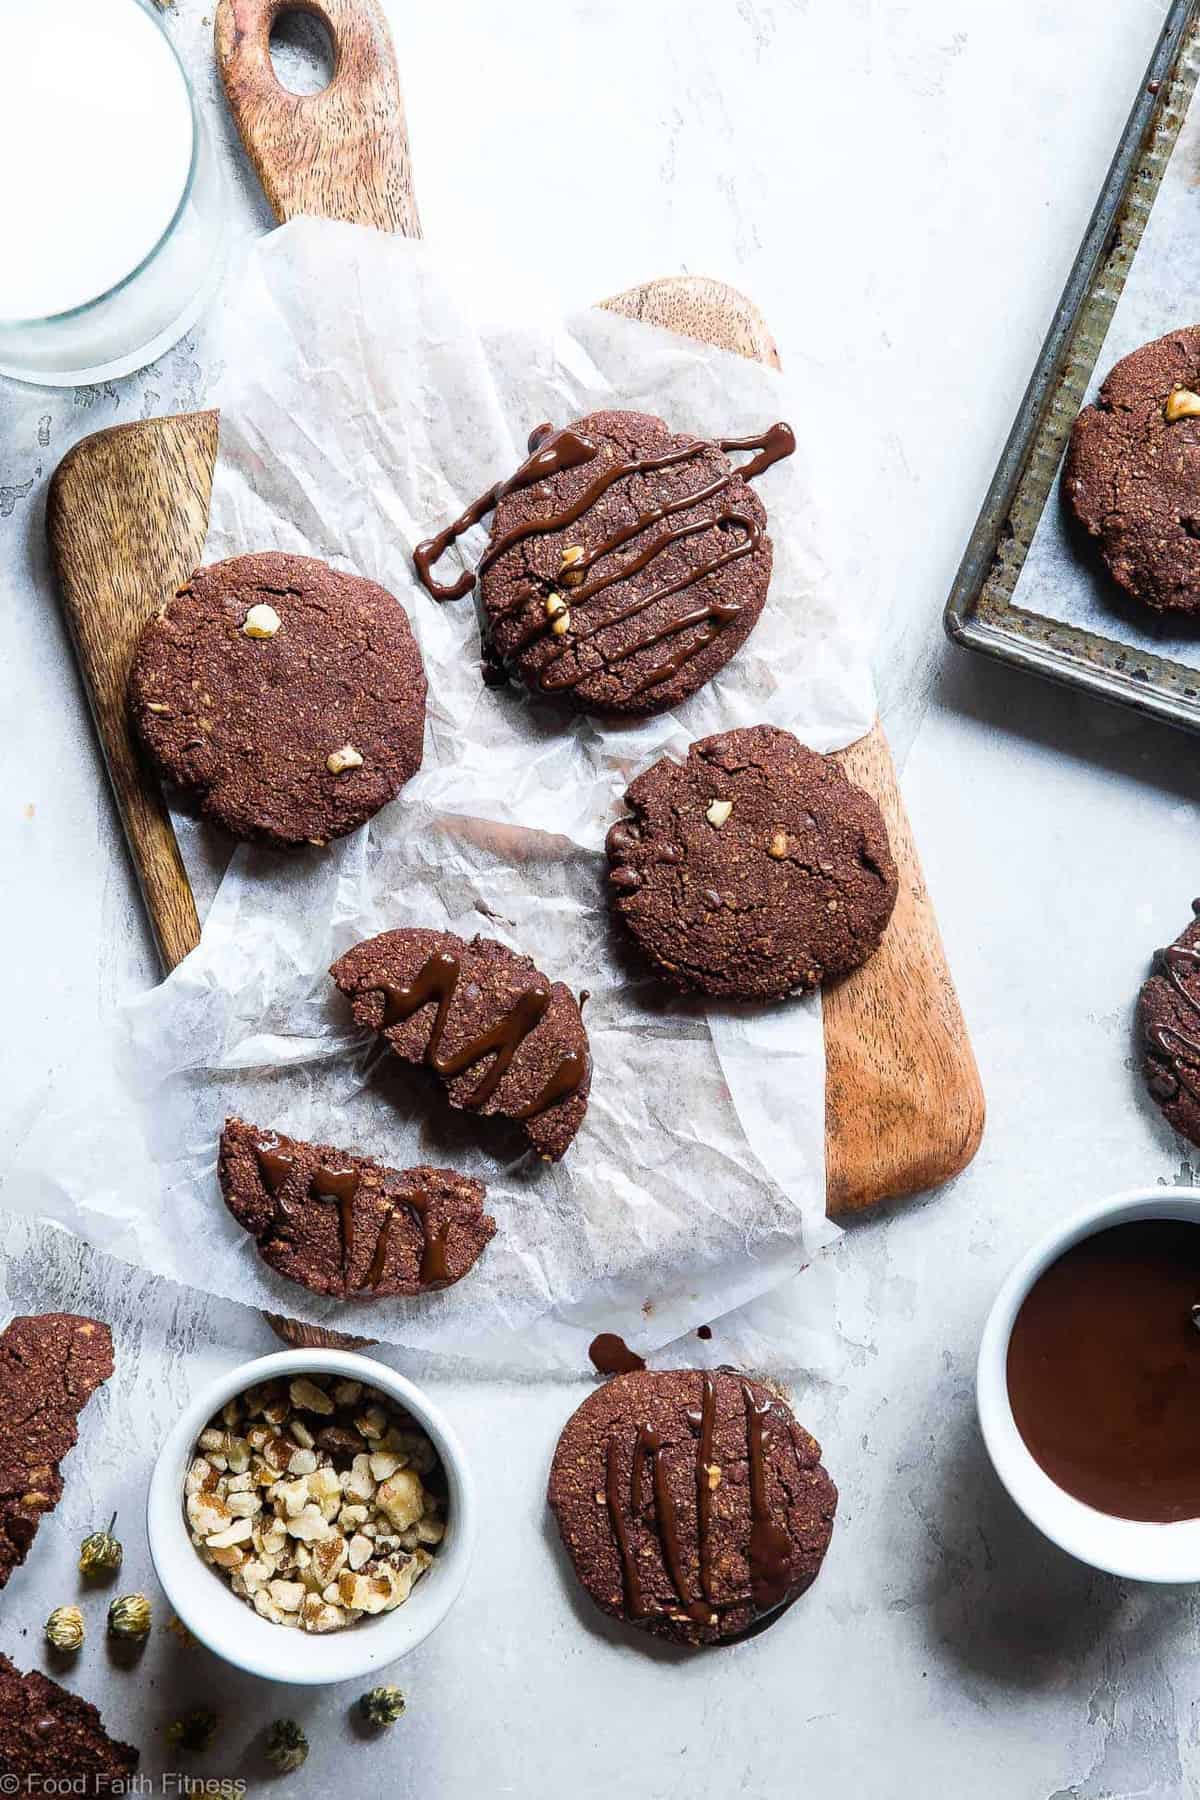 Vegan Gluten Free Brownie Cookies - These healthy and gluten free Chocolate Brownie Cookies are like always getting the edge piece - SO dense and chewy! You won't believe they're gluten free, paleo and only 120 calories! | #Foodfaithfitness | #Vegan #Paleo #Glutenfree #Dairyfree #Healthy